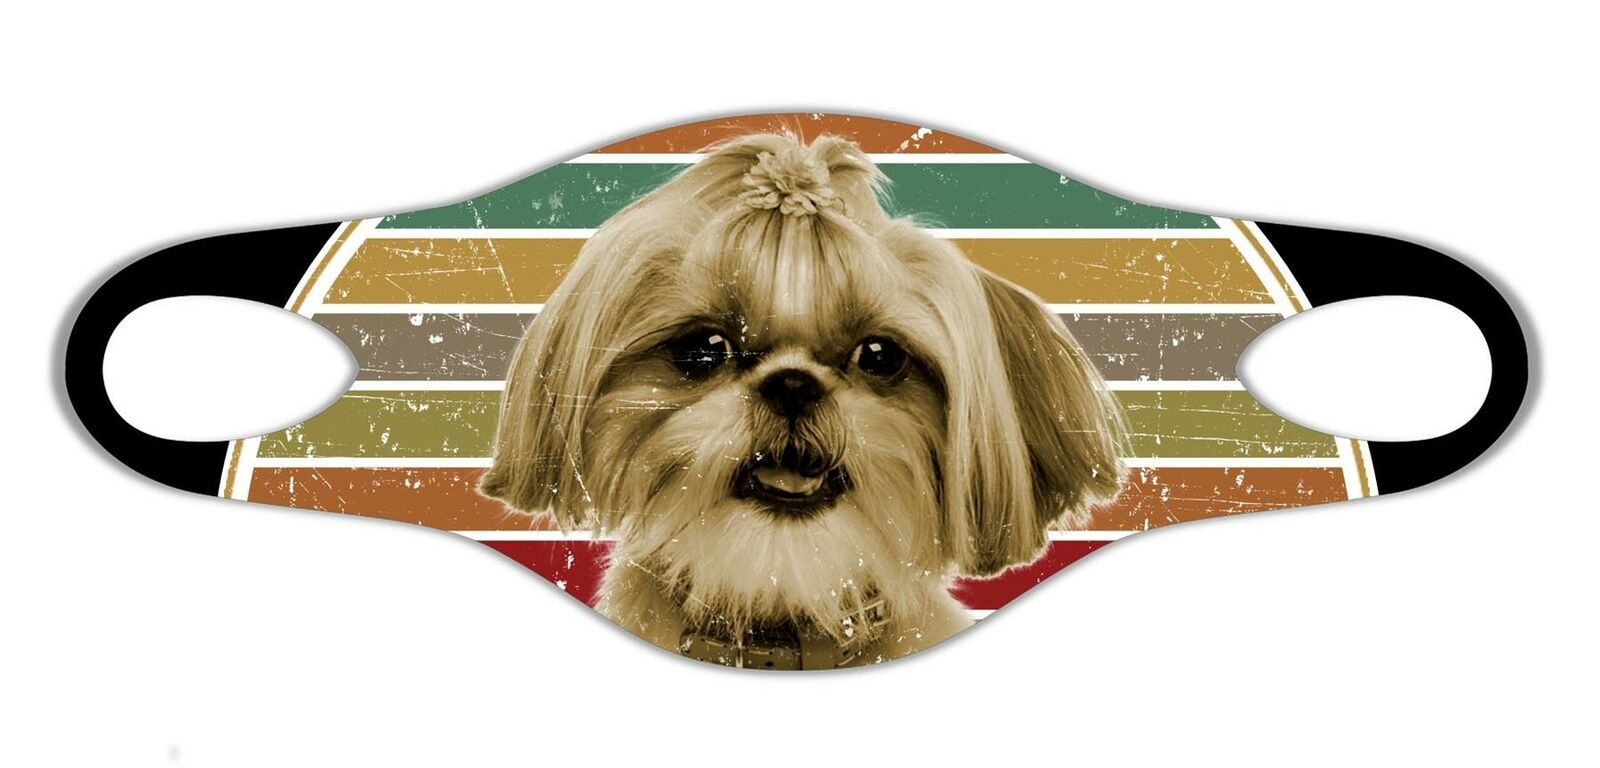 Shih Tzu dog lovers Soft face protective mask easily washed respire airy gift